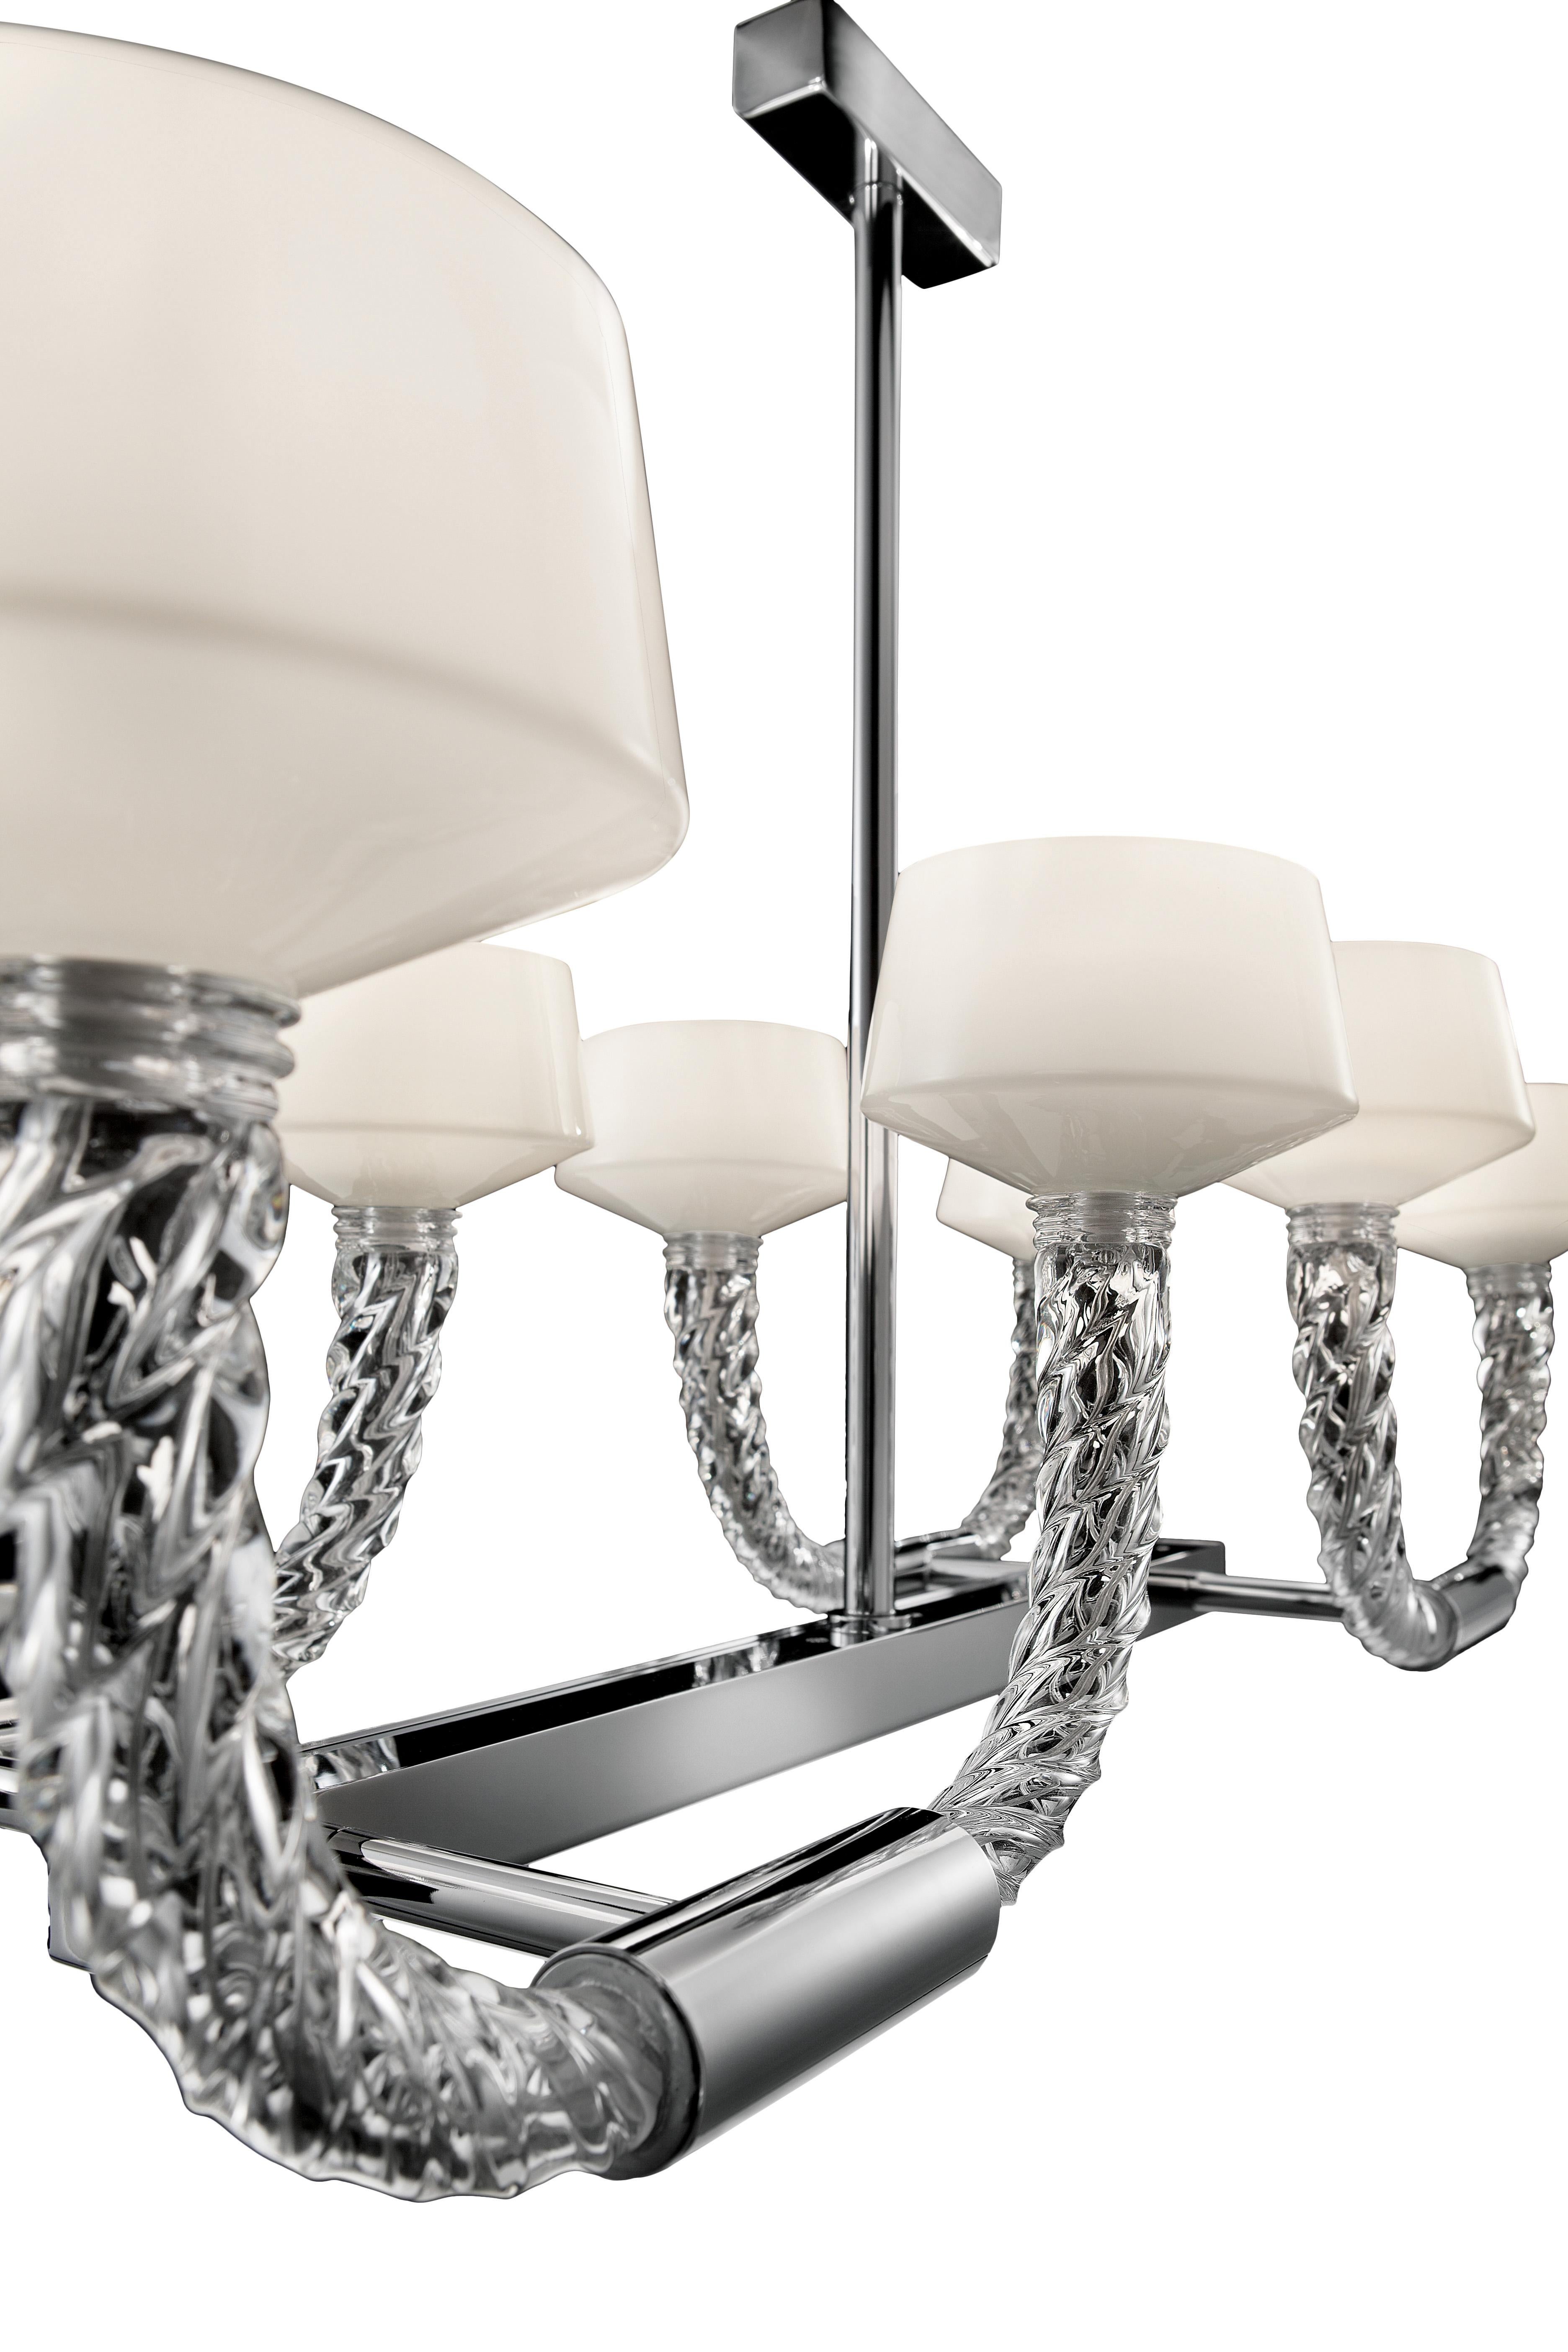 Italian Twins 7226 08 Chandelier in Glass with Chrome Finishing, by Barovier&Toso